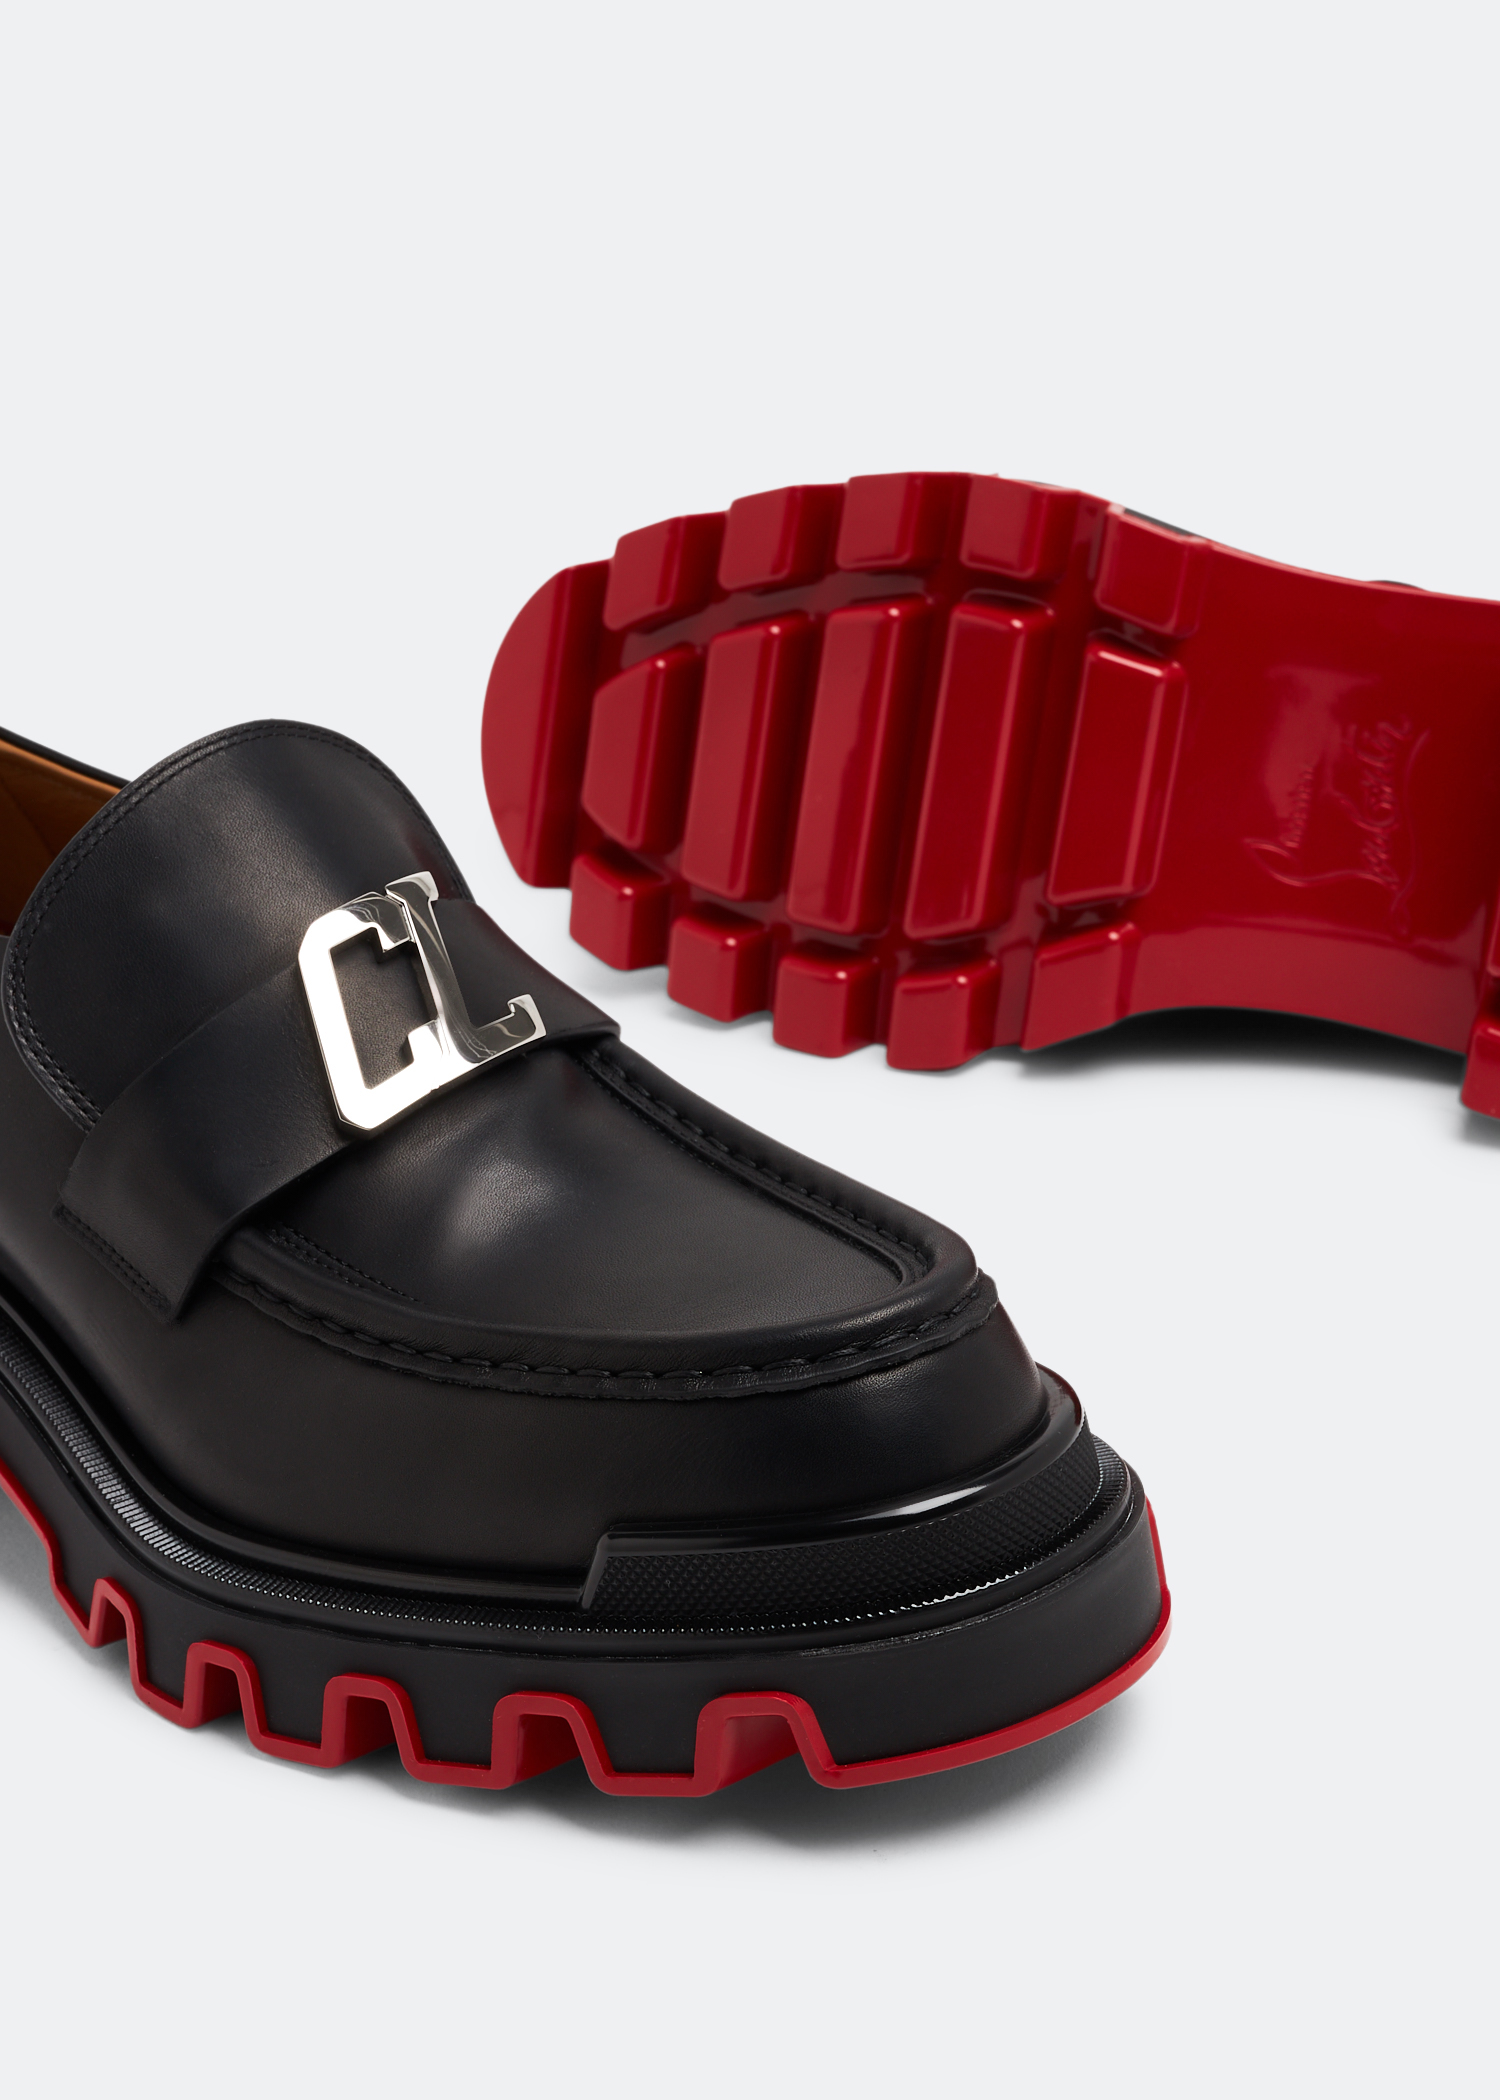 CL Moc Dune - Loafers - Calf leather - Black - Christian Louboutin